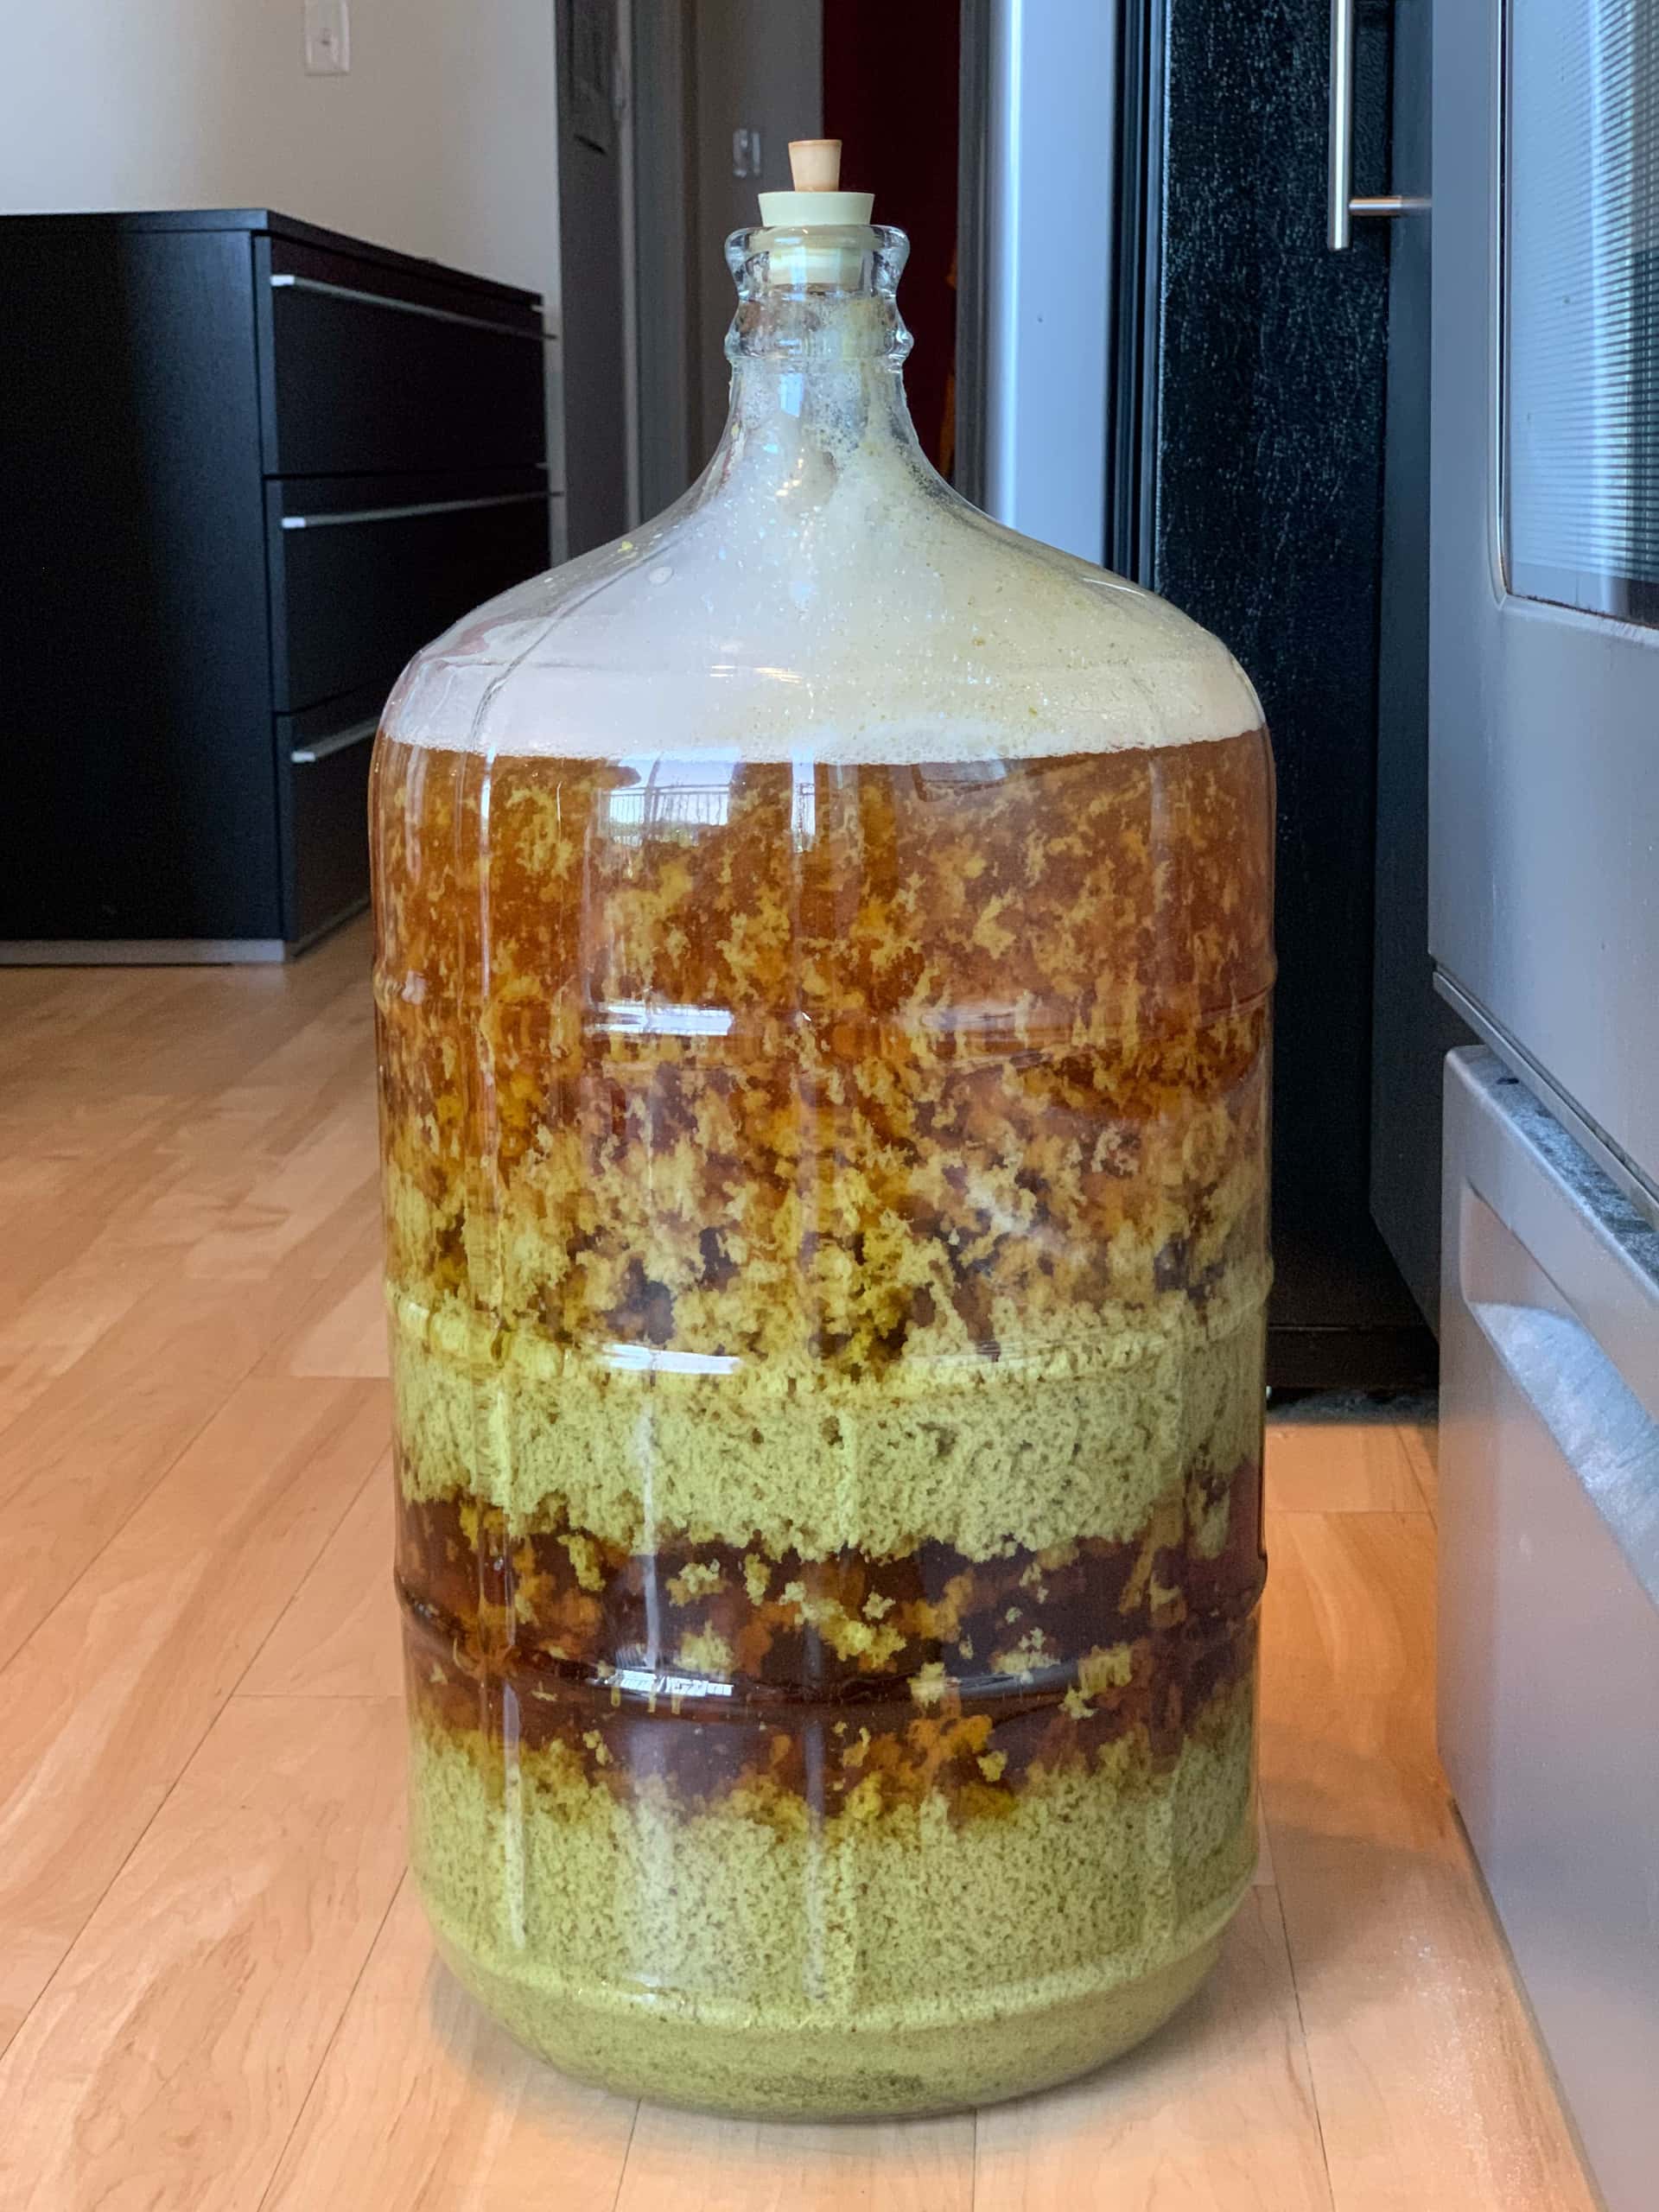 wort settling into layers in a glass carboy